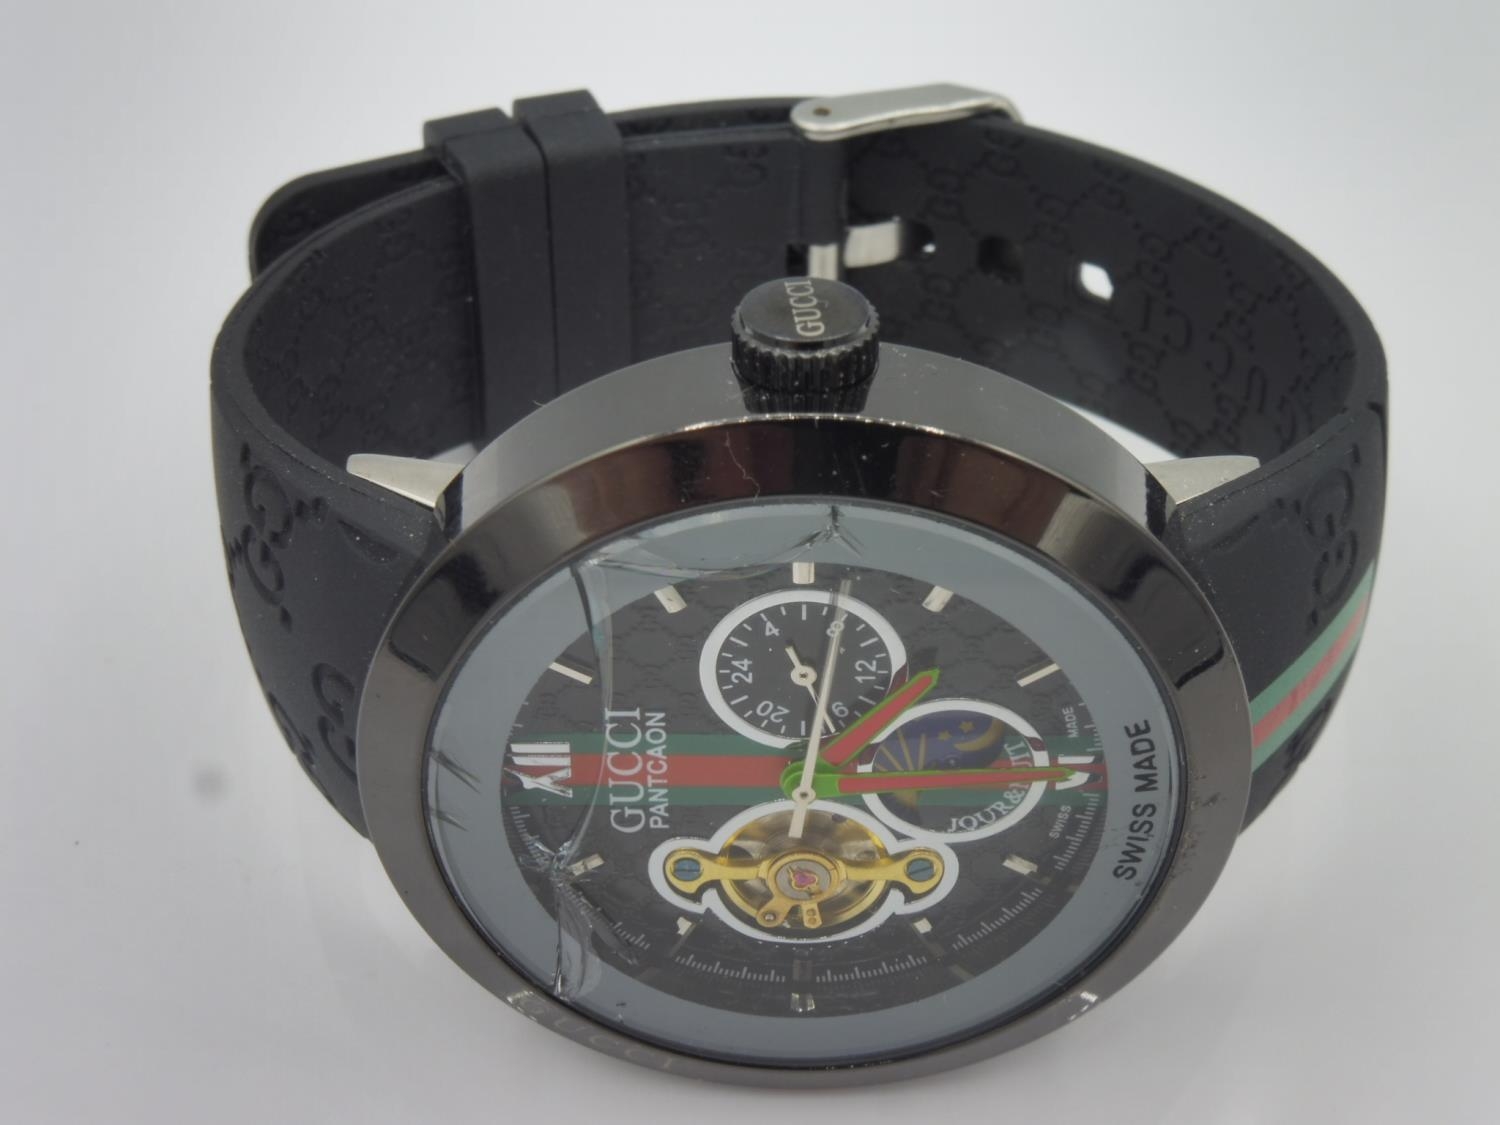 Gucci Pantcaon Jour & Nuit Made Gents Wrist Watch (Unauthenticated) a/f (Working Tested)